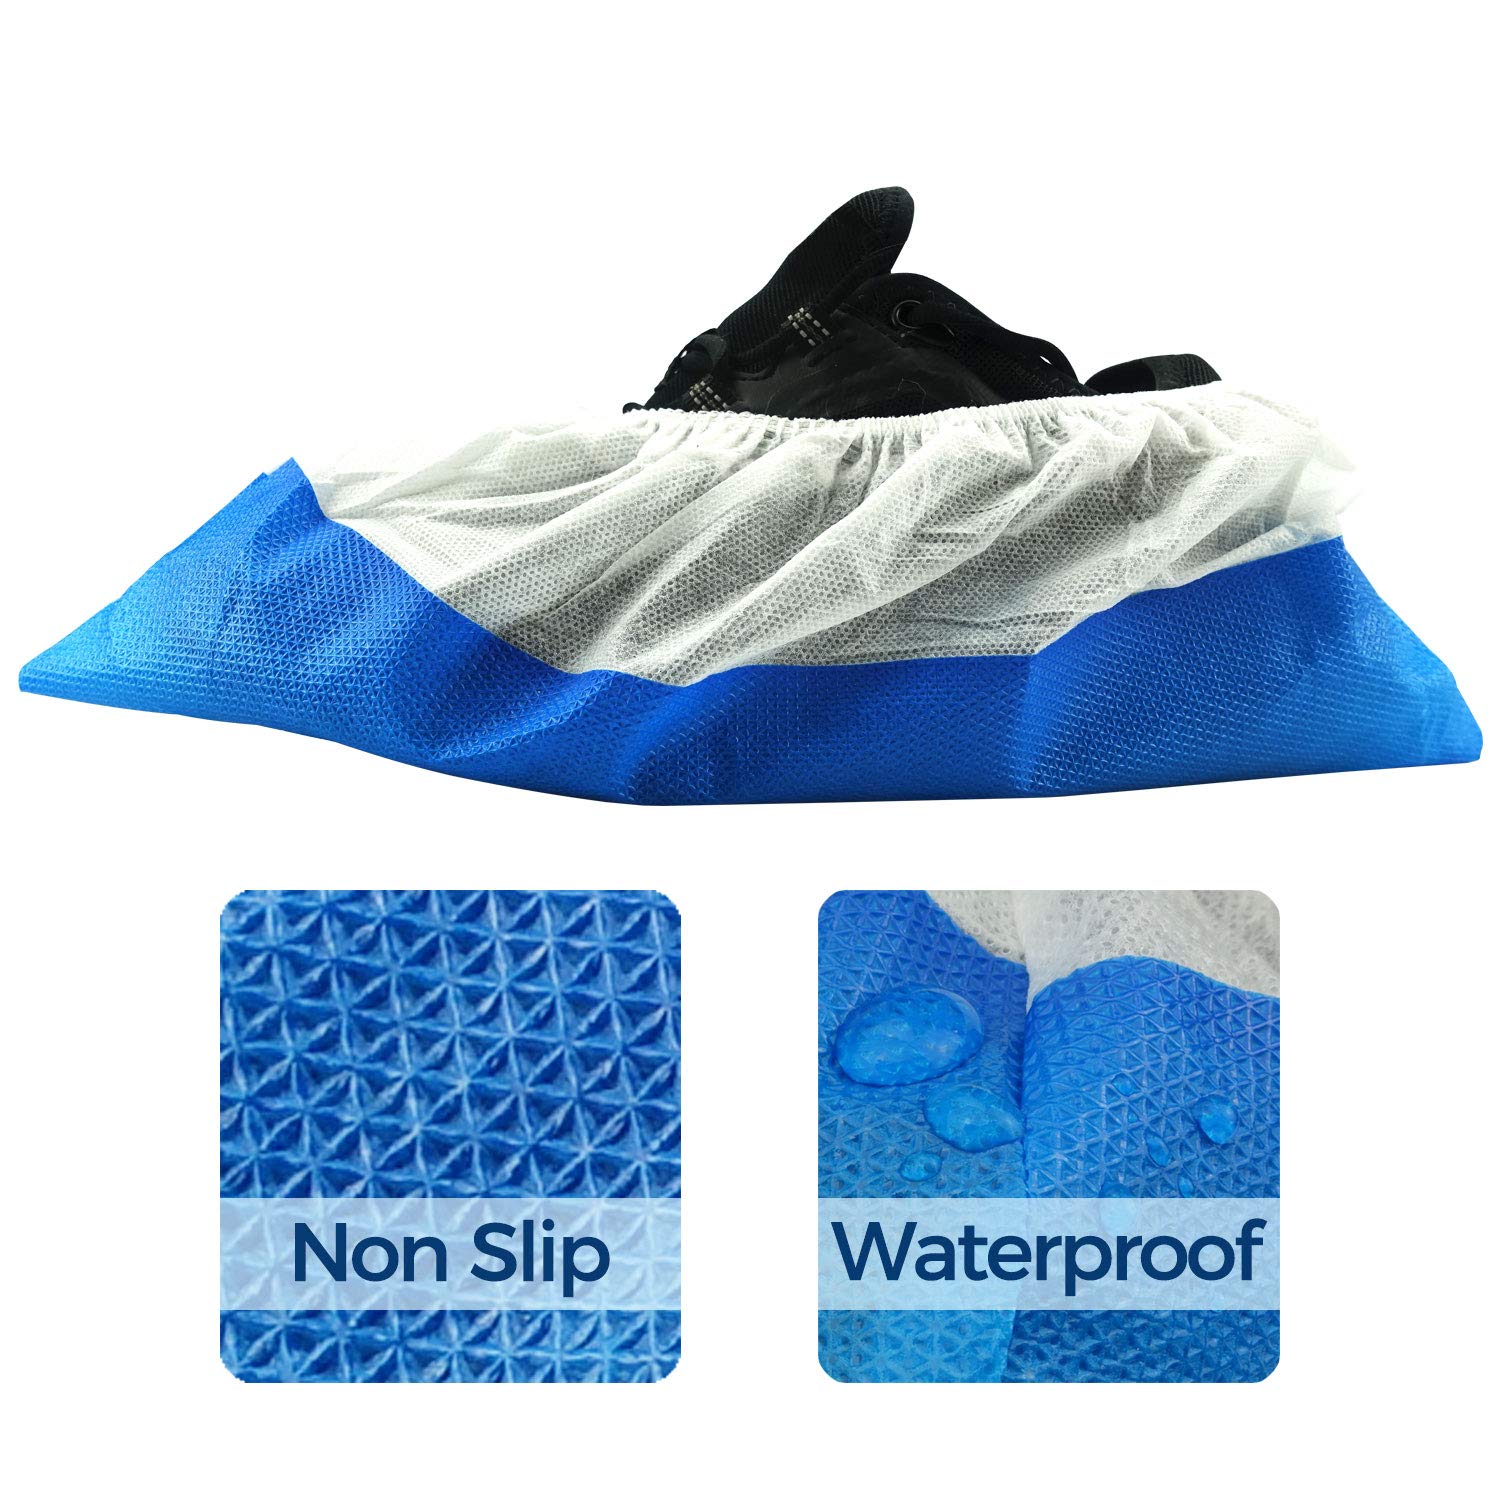 OhanaPro Premium Disposable Non Slip Boot & Shoe Covers - Pack of 50 - Waterproof Double Layer Bottom - Extra Thick, Durable, Recyclable - One Size Fits Most